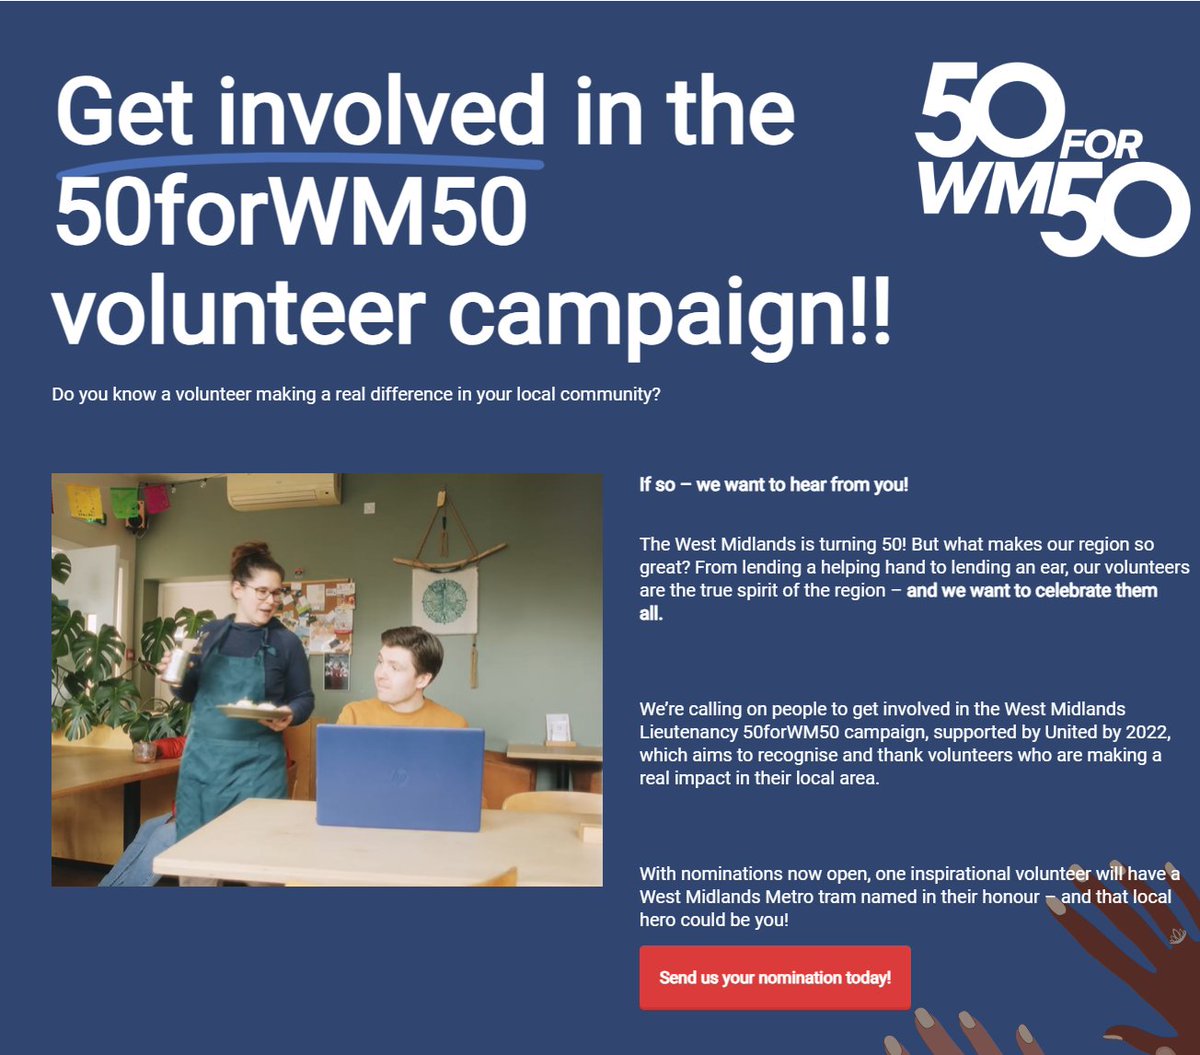 Do you know a volunteer making a real difference in your local community? Get involved in the 50forWM50 volunteer campaign! unitedby2022.com/50forwm50/